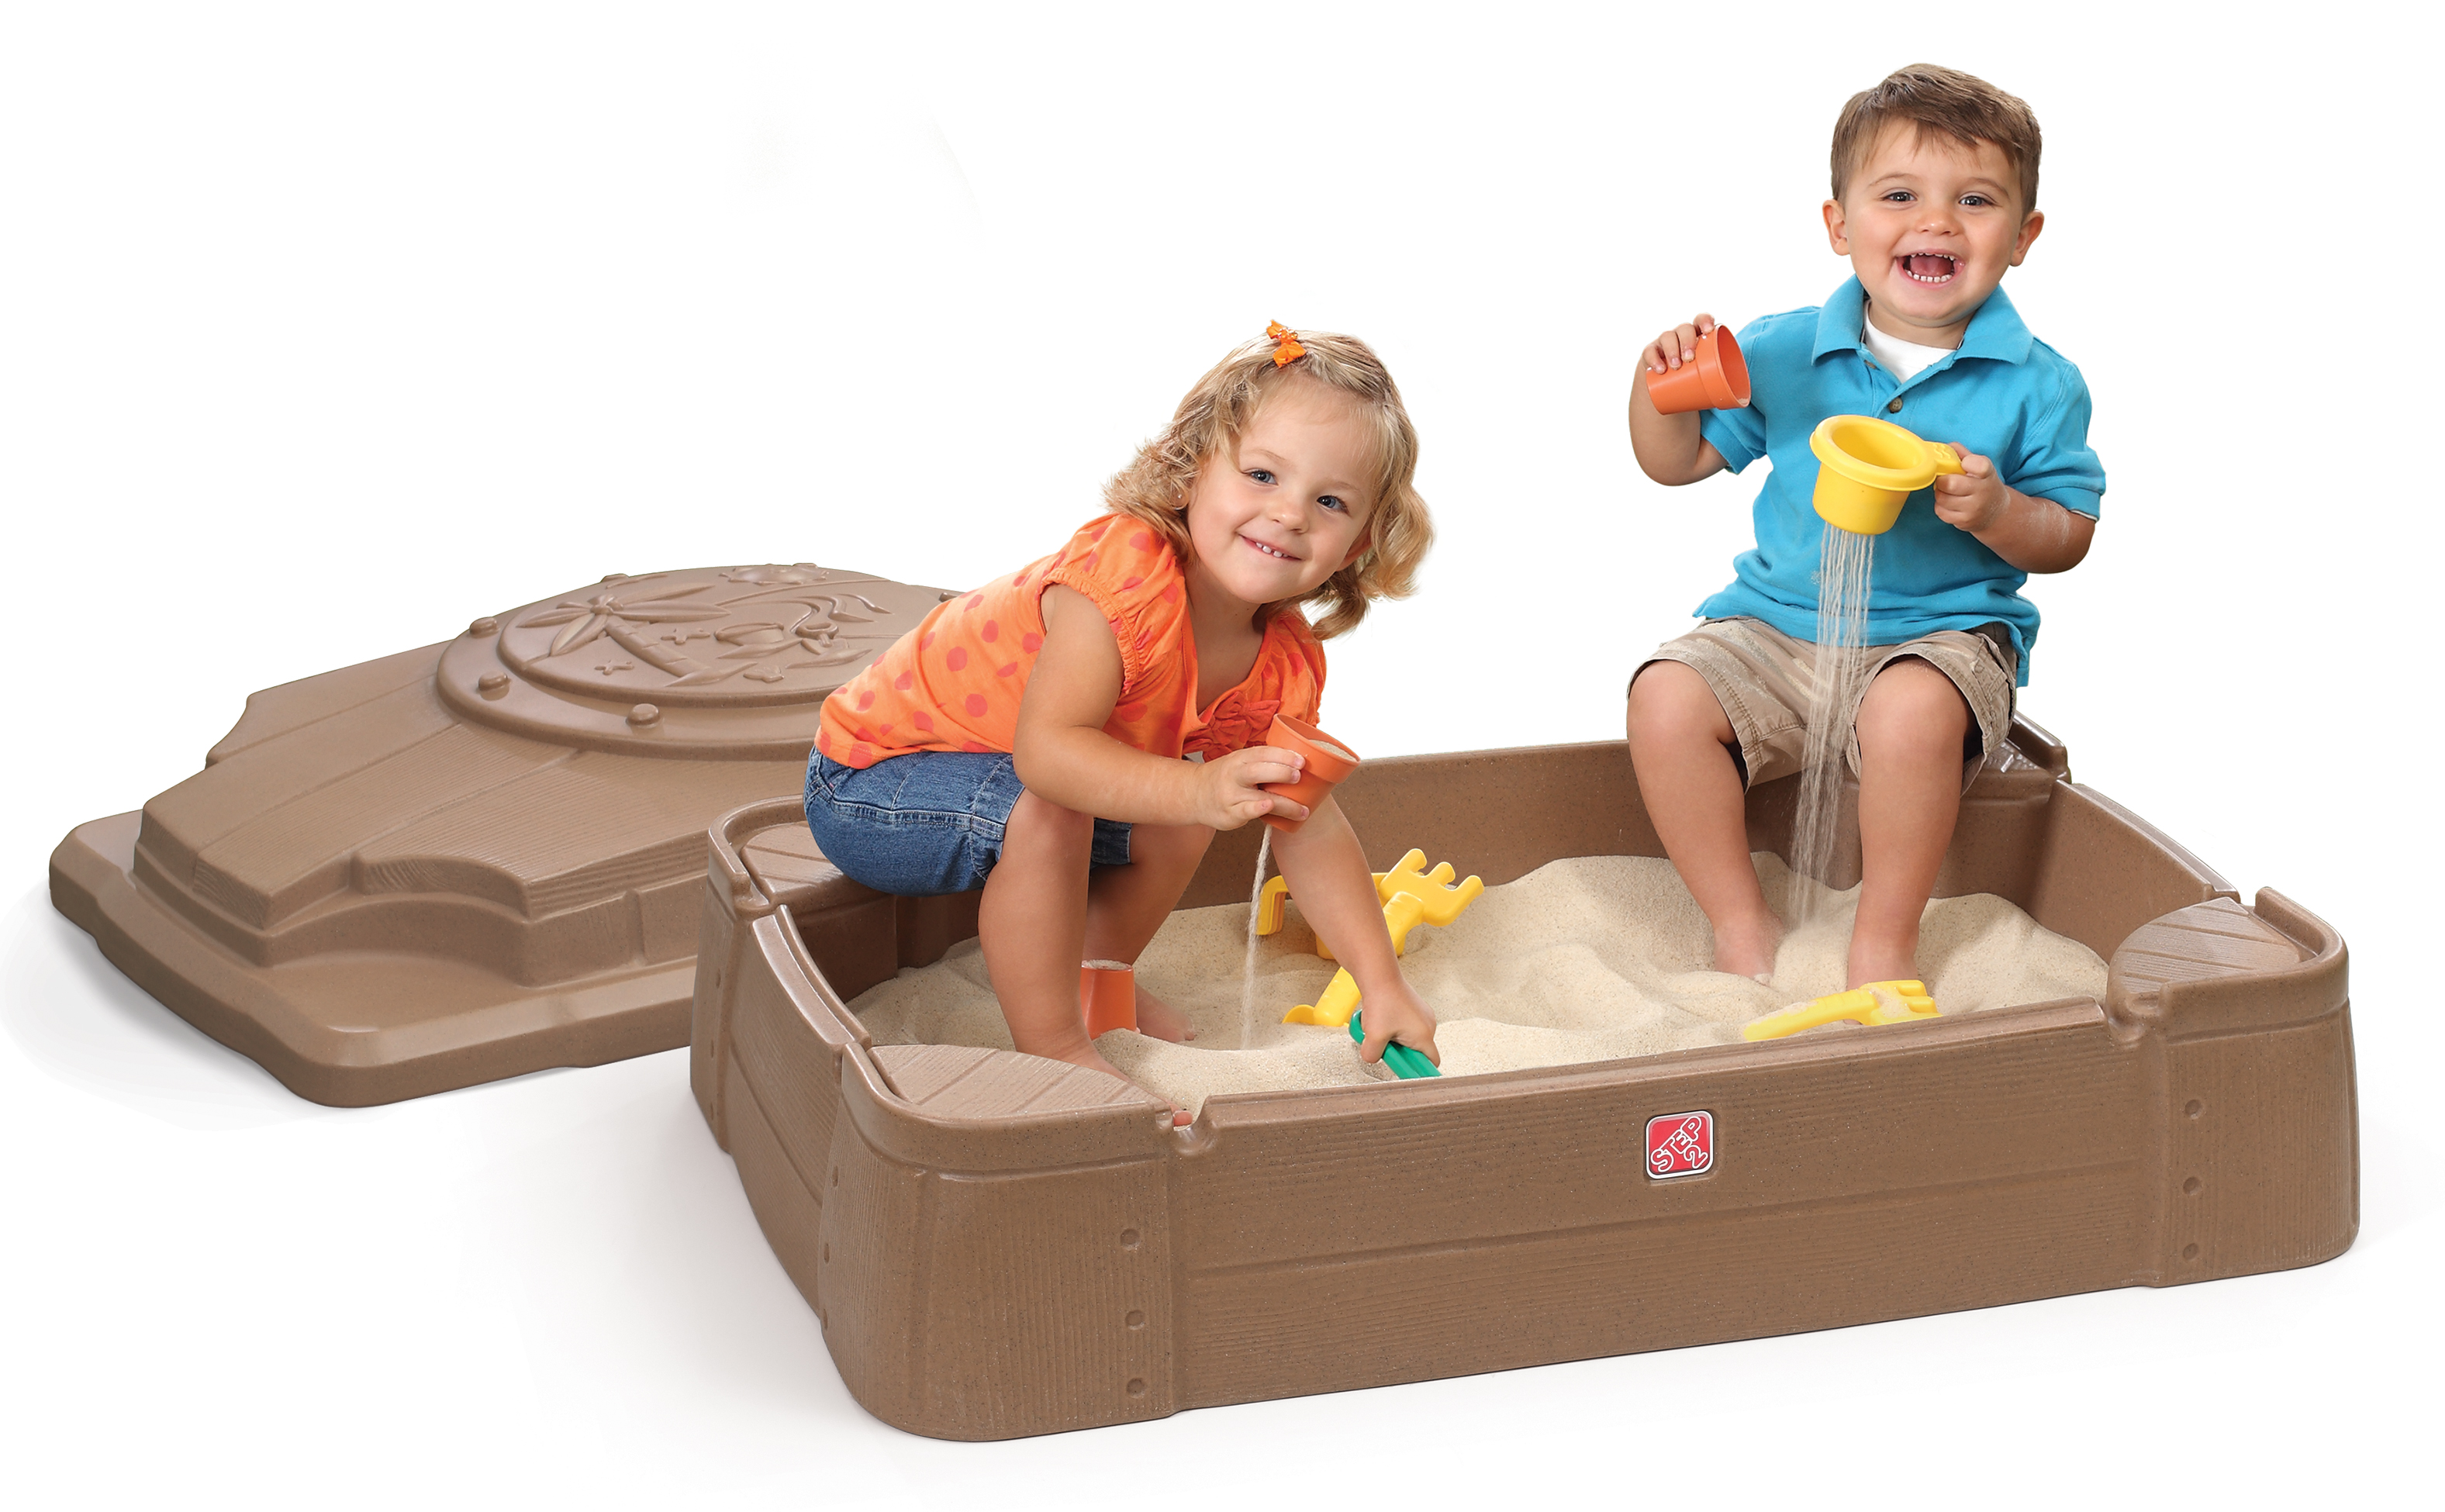 Step2 Play and Store Sandbox Brown Plastic Kids Outdoor Toy with Cover - image 1 of 16